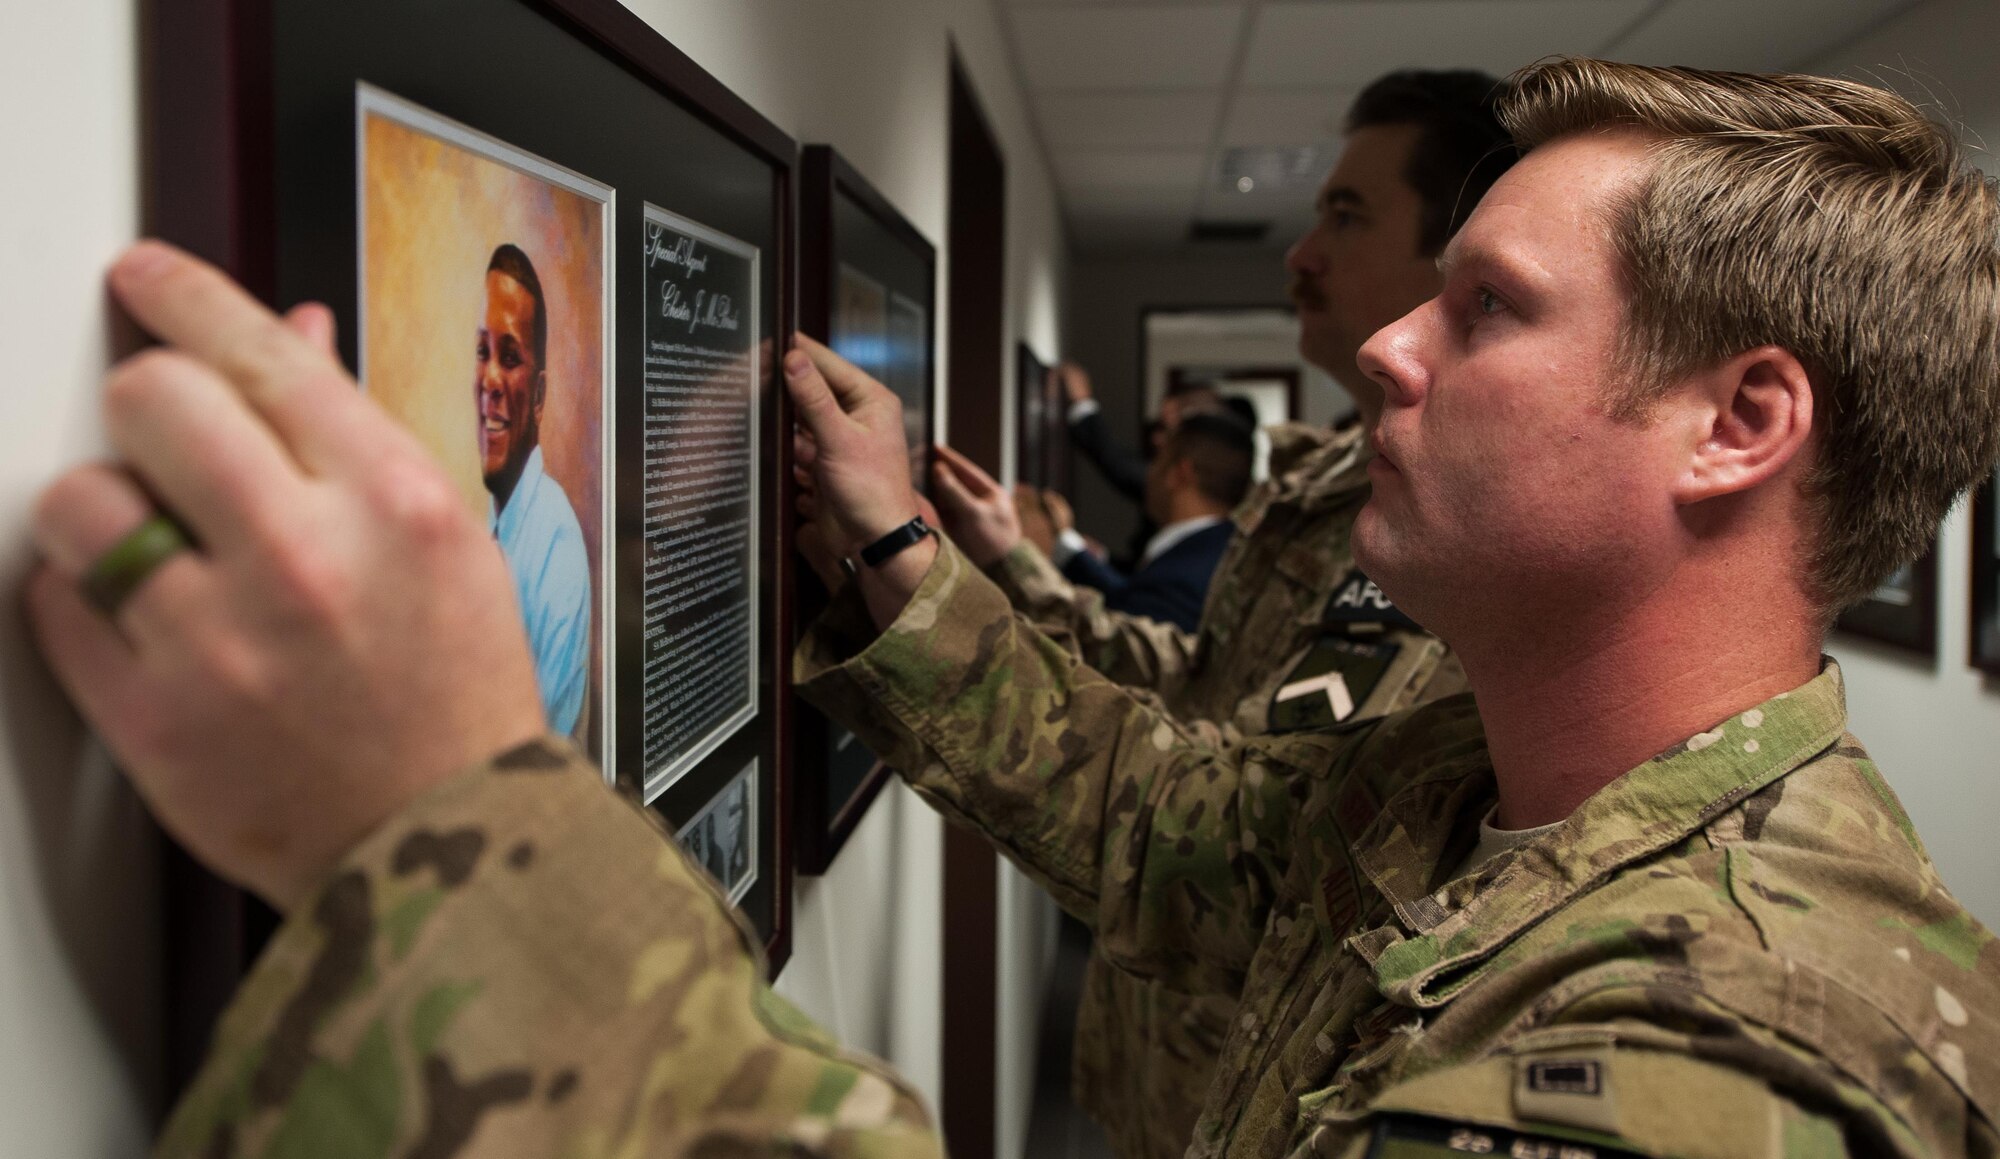 Special Agent Bradley Allen, 25th Expeditionary Field Investigation Squadron agent, hangs the portrait of a deceased Air Force Office of Special Investigations portrait during the 25th Expeditionary Field Investigation Squadron’s fallen heroes dedication memorial at Ramstein Air Base, Germany, Nov. 10, 2016. The portraits contained biographies of the servicemember that told their story and the legacy they left behind. Veteran’s Day is a celebration to honor America's veterans for their patriotism, love of country, and willingness to serve and sacrifice, even if it means their lives. According to a recent Congressional Research Service report, more than 6,500 U.S. service members have lost their lives in post-9/11 conflicts in Iraq and Afghanistan. (U.S. Air Force photo by Airman 1st Class Lane T. Plummer)